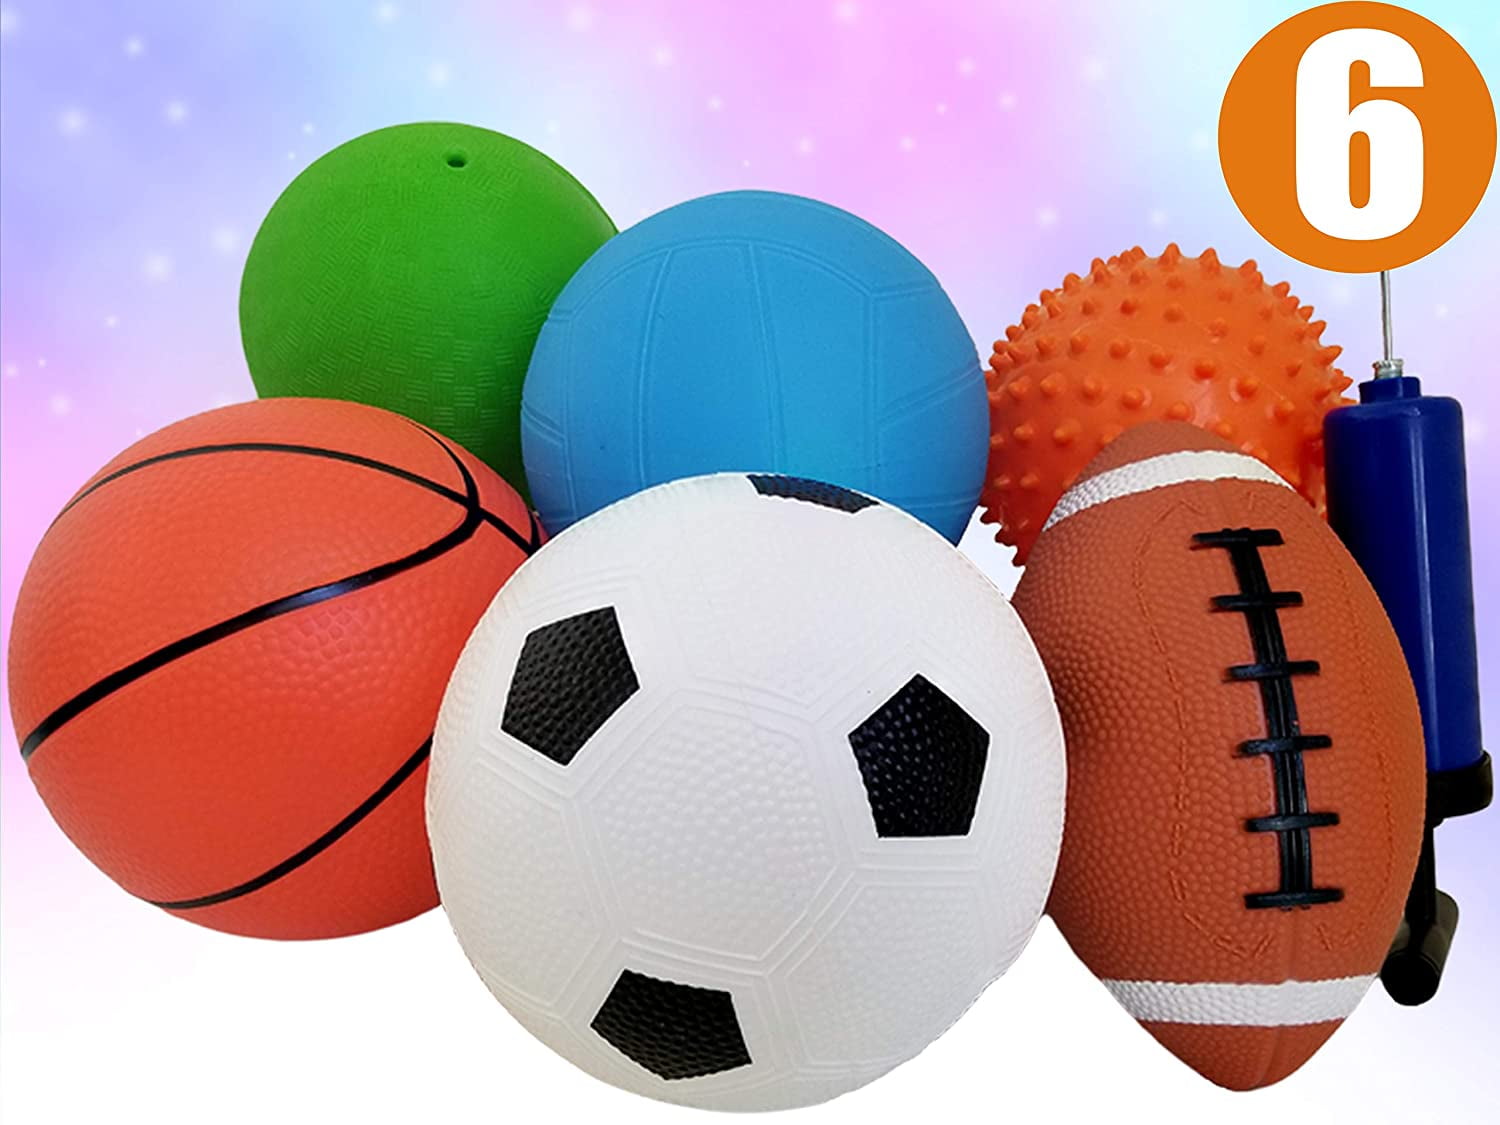 5" Basketball 5" Playground 5" Soccer Ball Set of 4 Sports Balls with Pump 